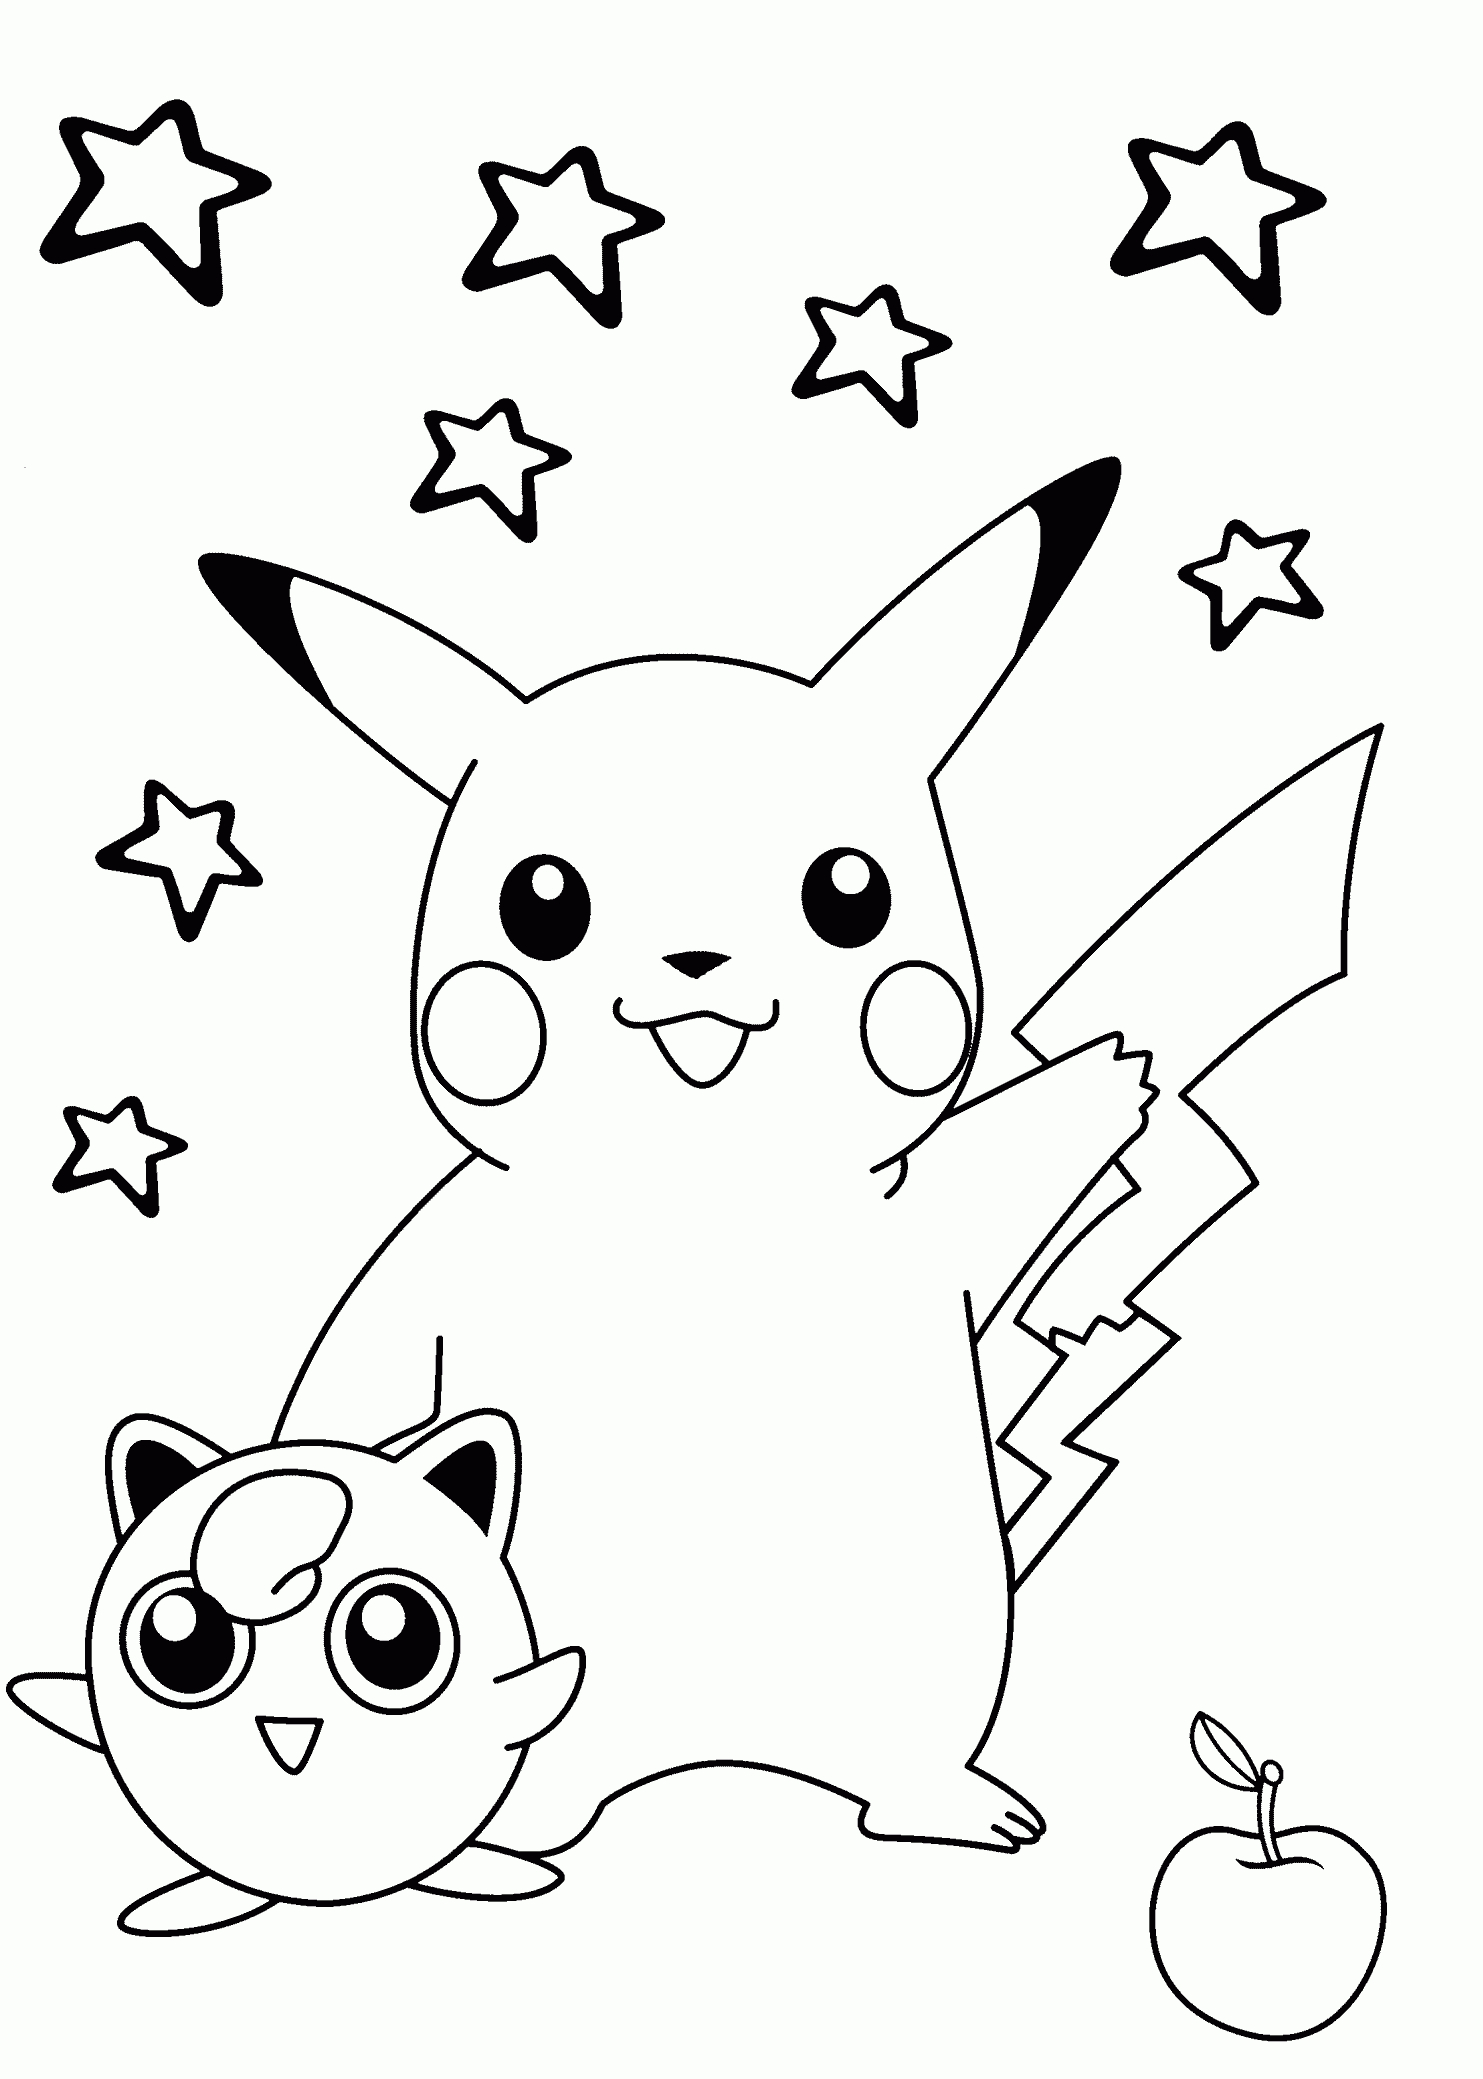 Smiling Pokemon Coloring Pages For Kids, Printable Free | Coloring - Free Printable Pokemon Coloring Pages